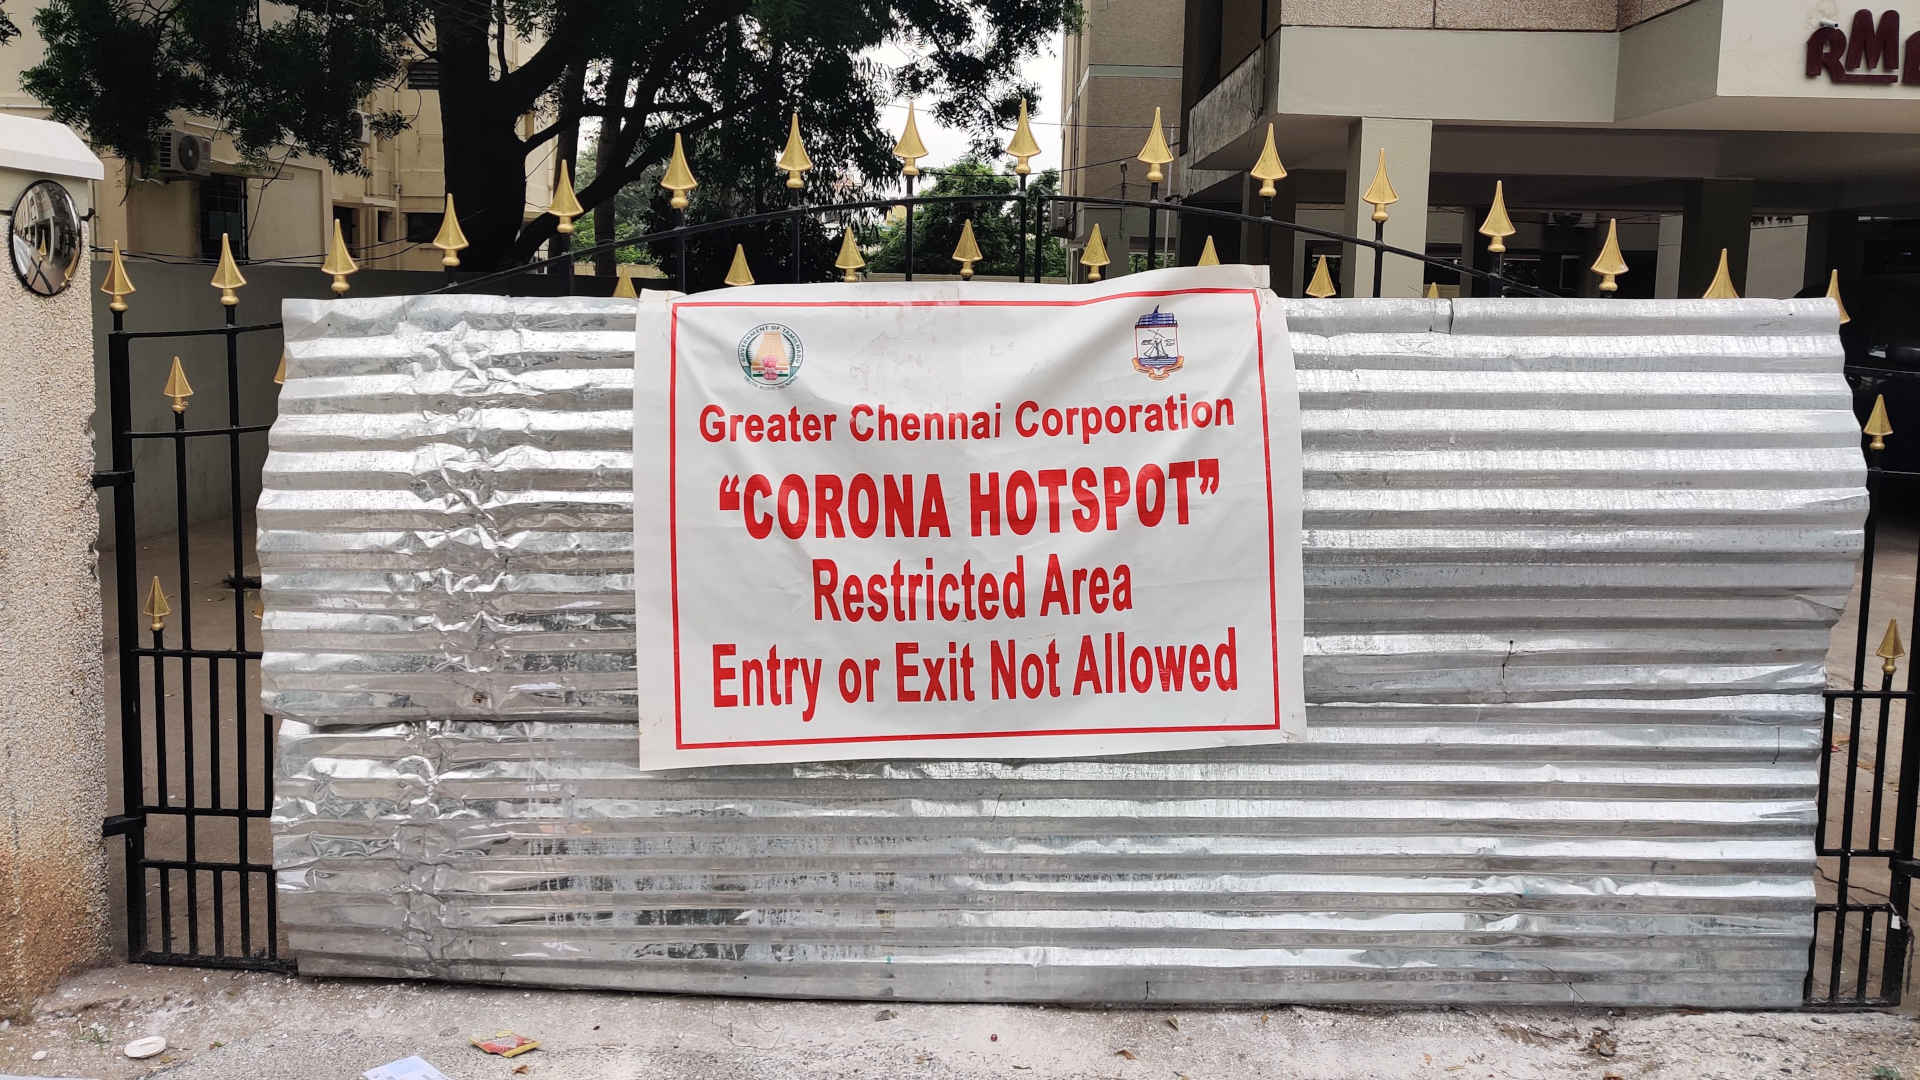 A restricted area sign posted in Chennai, India in November 2020.